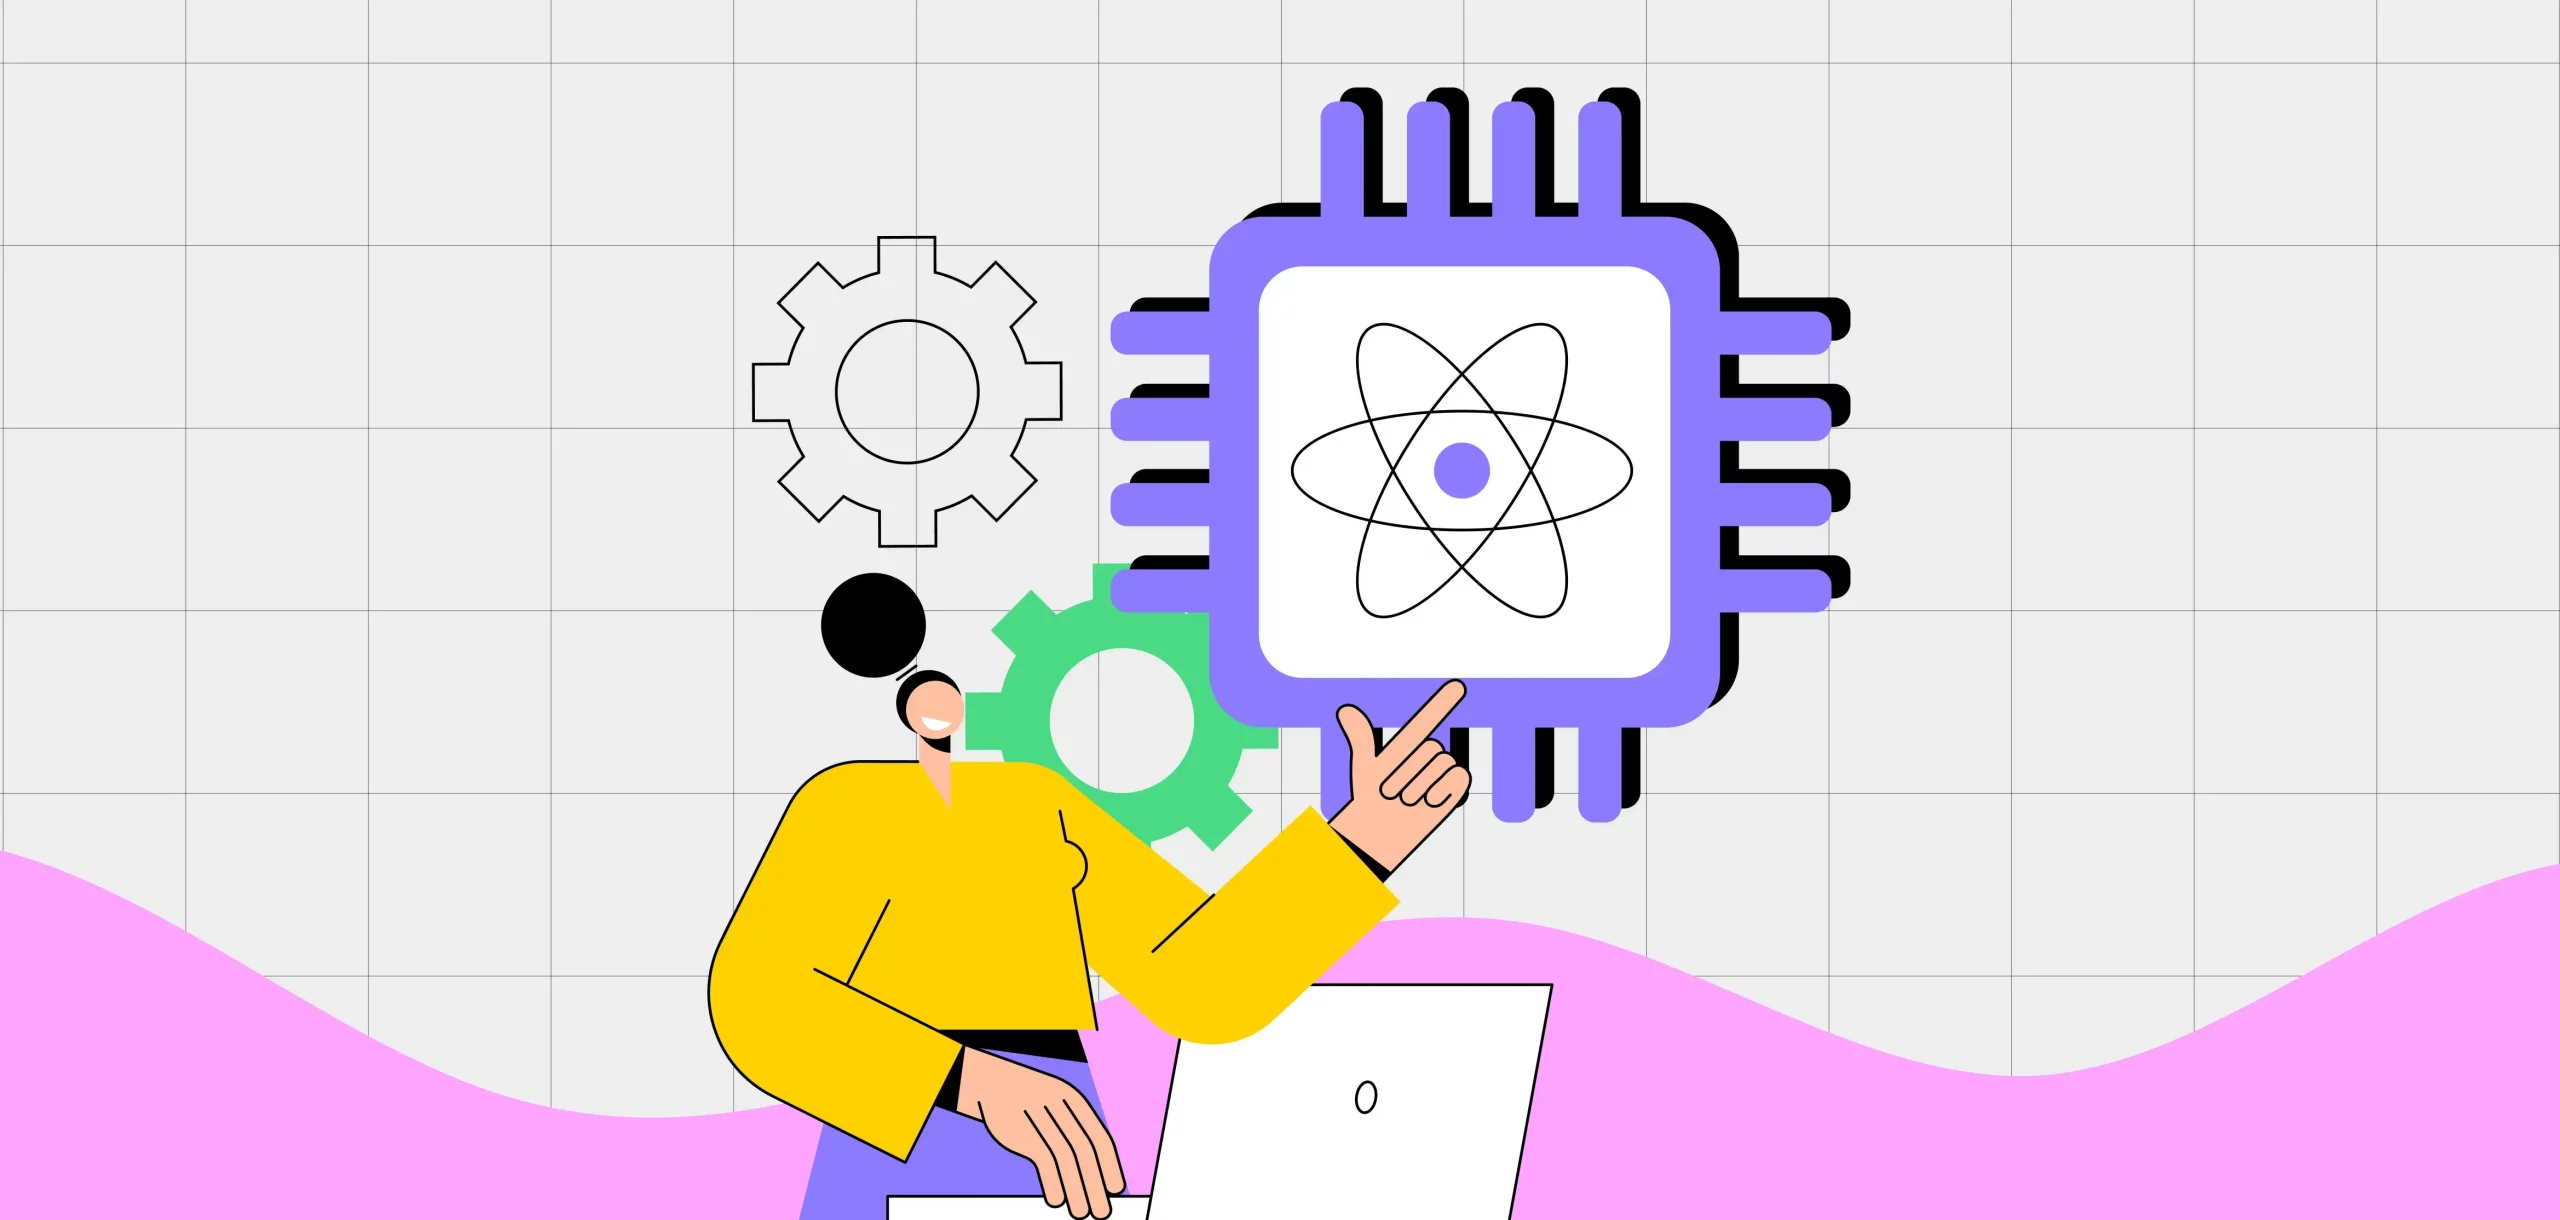 How to Hire React Native Developers